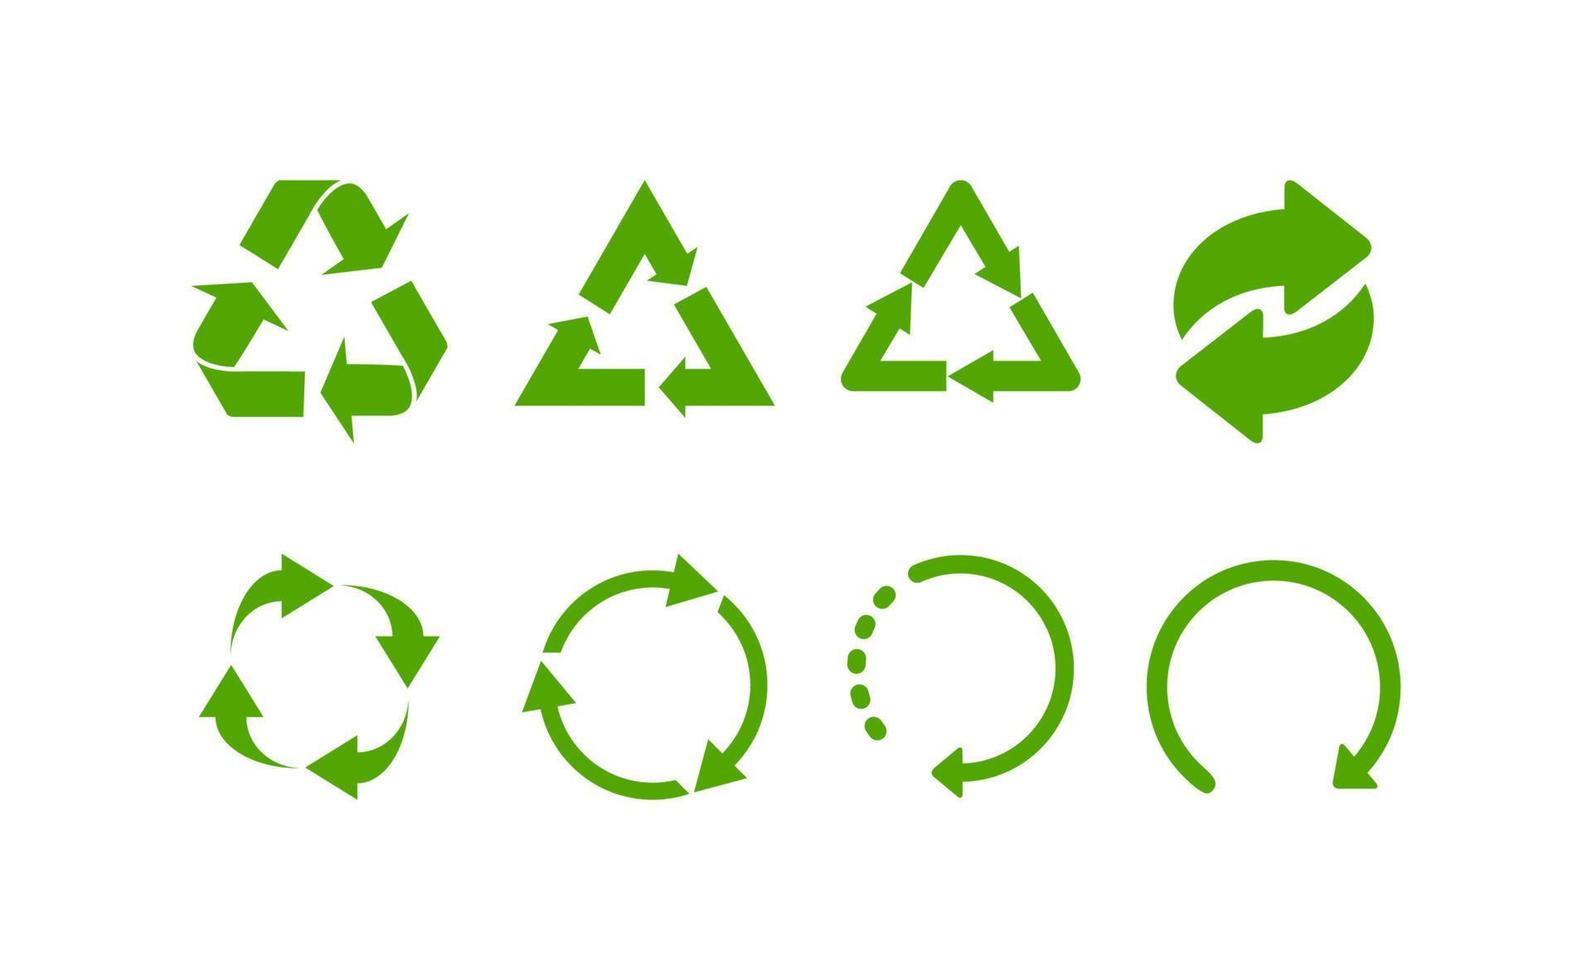 Green Recycle signs. Recycle icons. Set of green recycle symbols. Eps10 vector